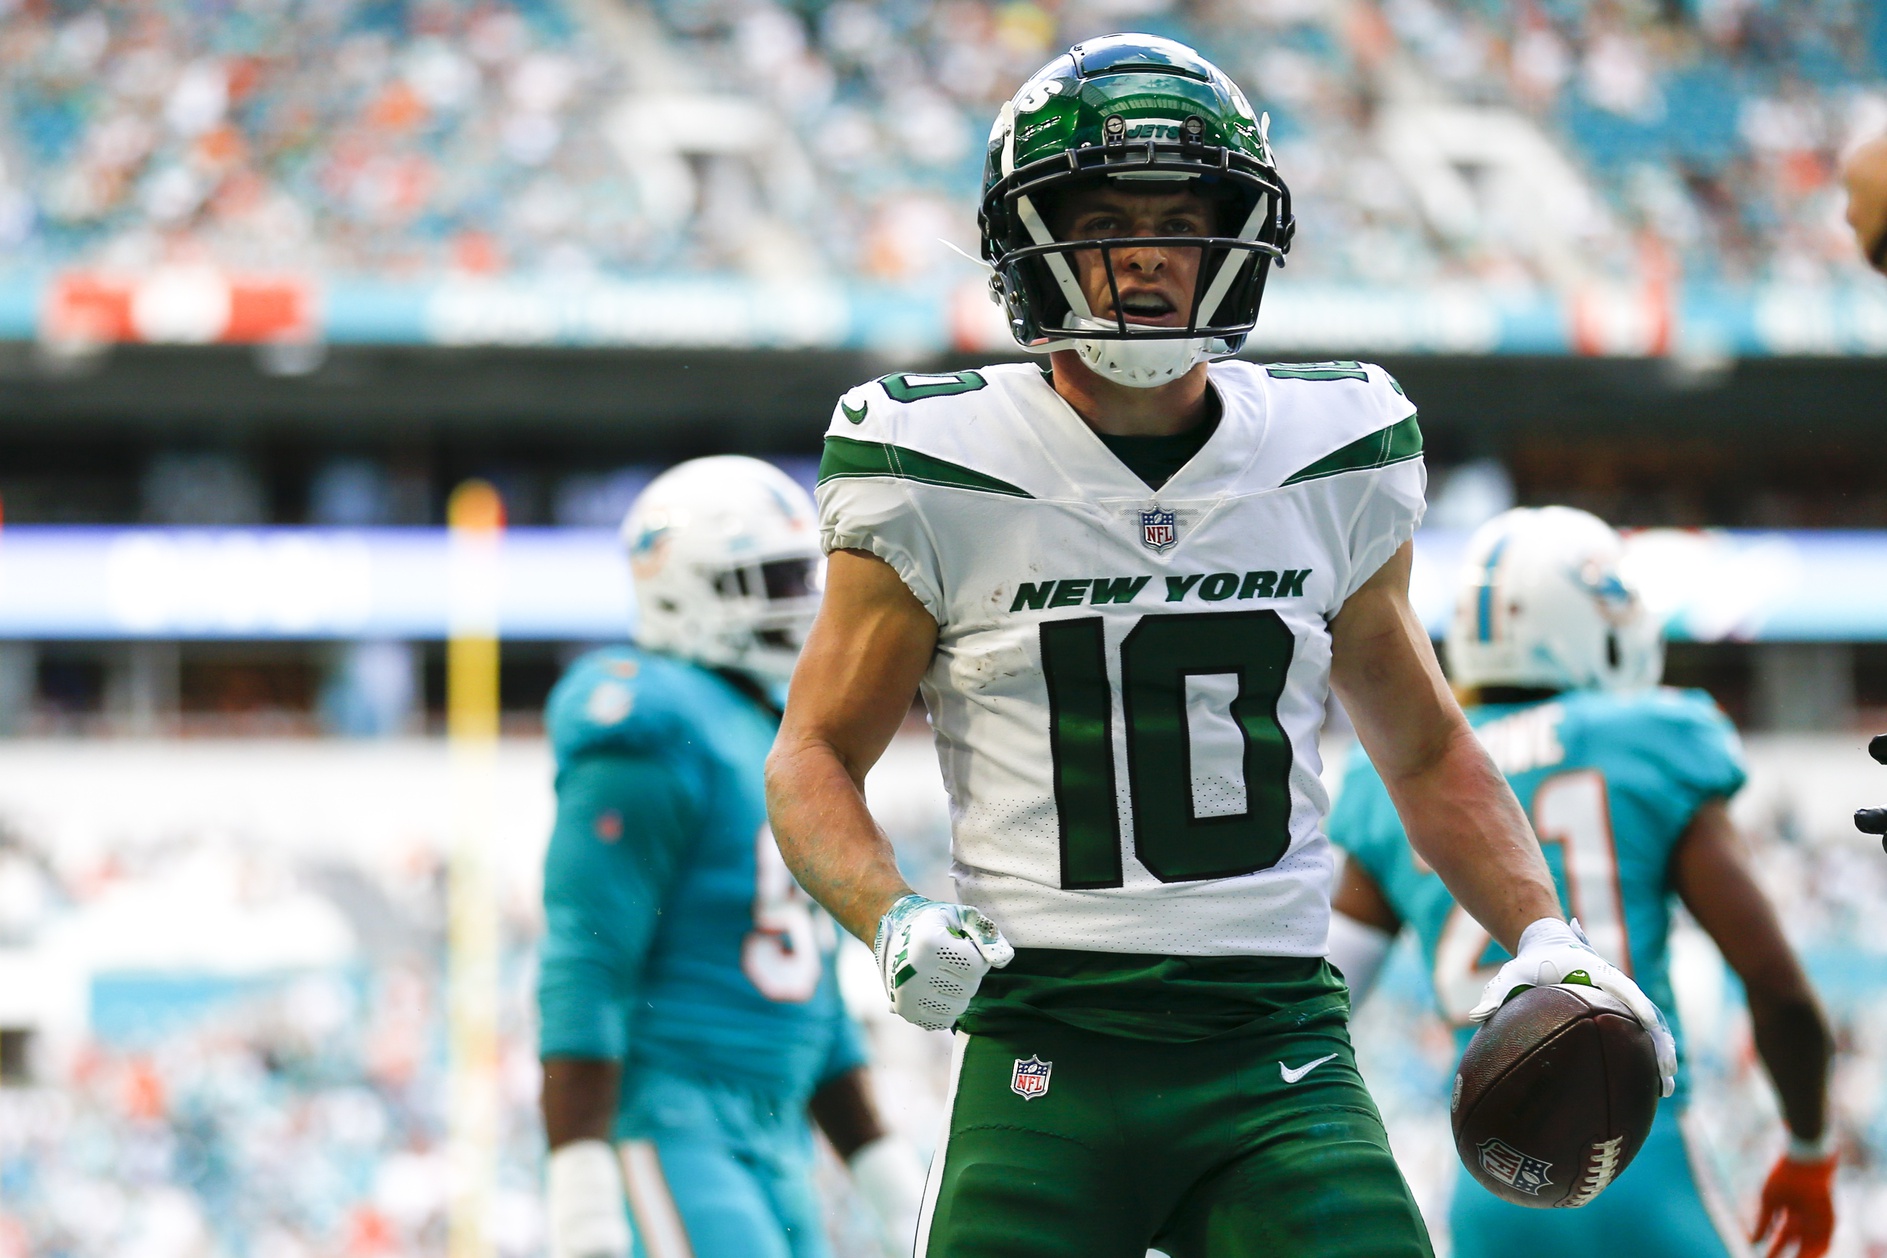 New York Jets place wide receiver Braxton Berrios on injured